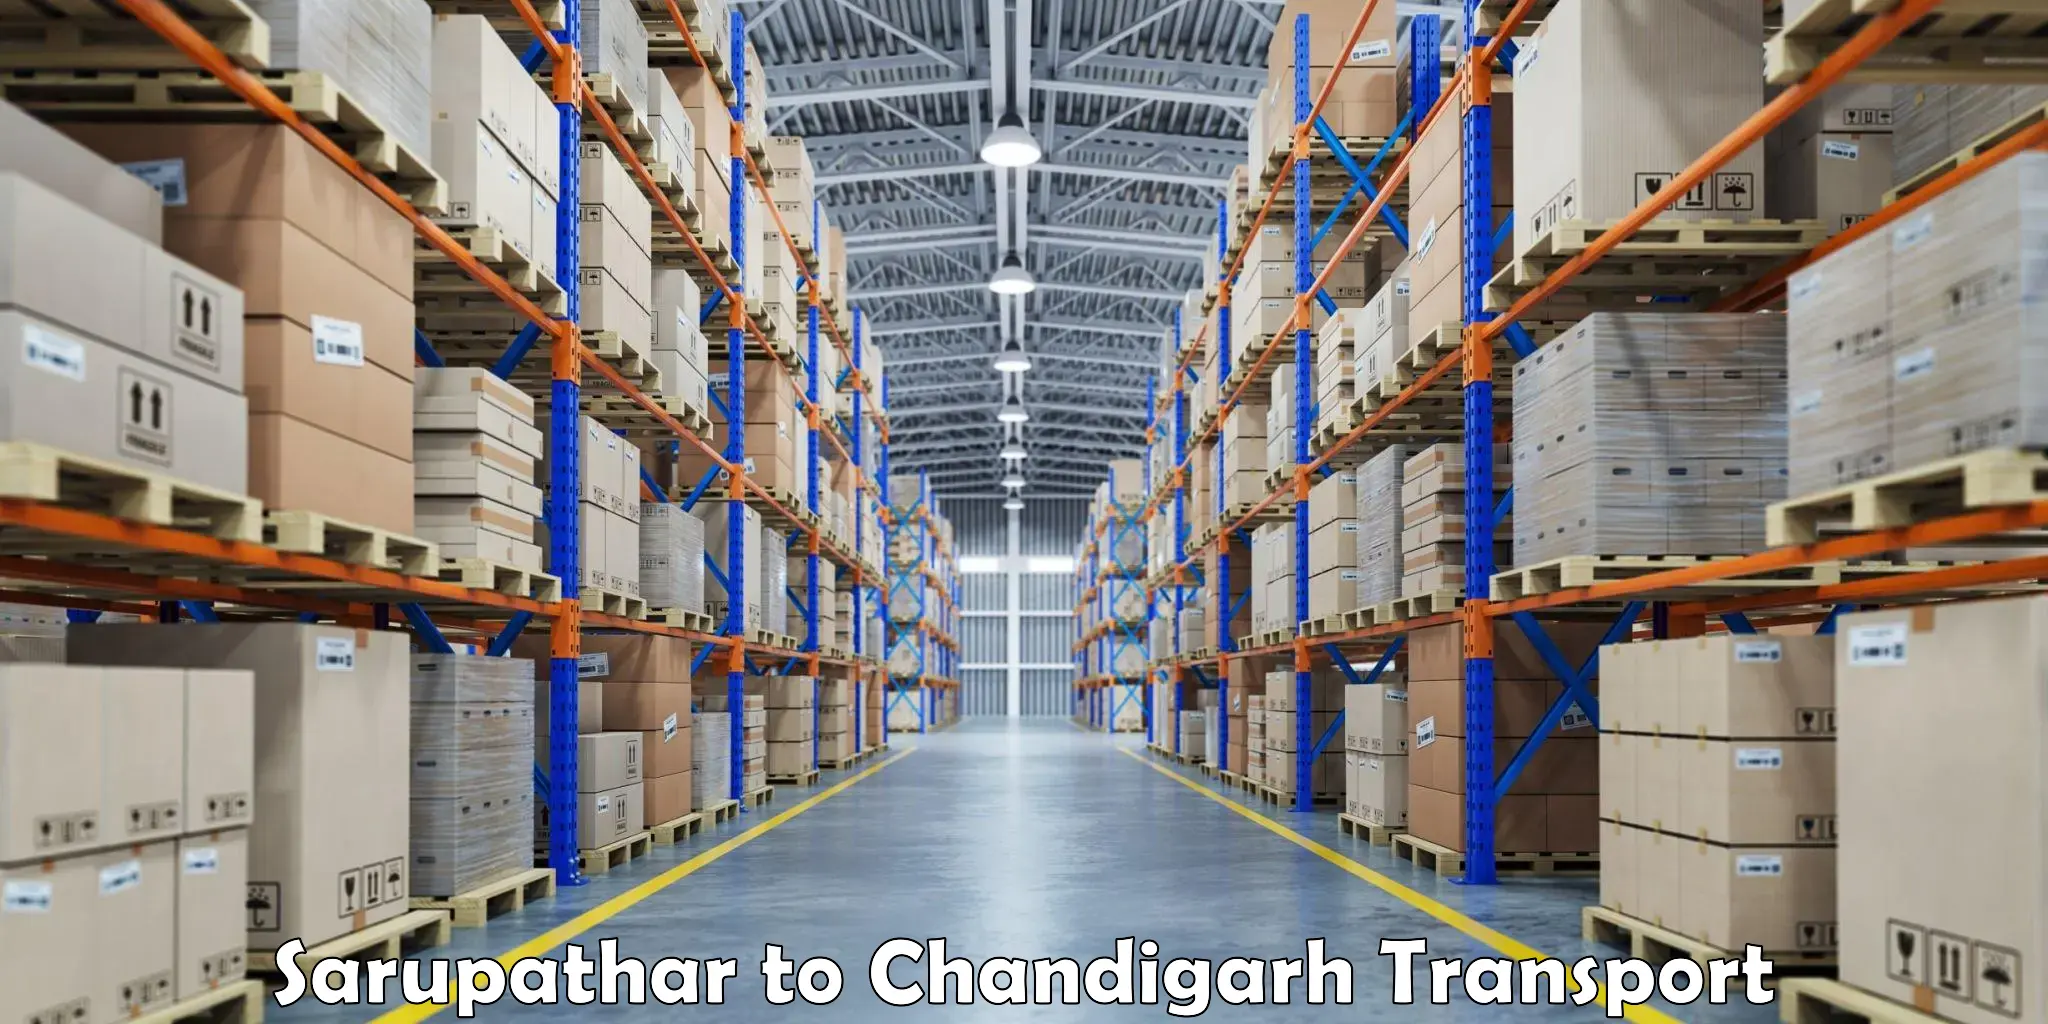 Delivery service Sarupathar to Chandigarh